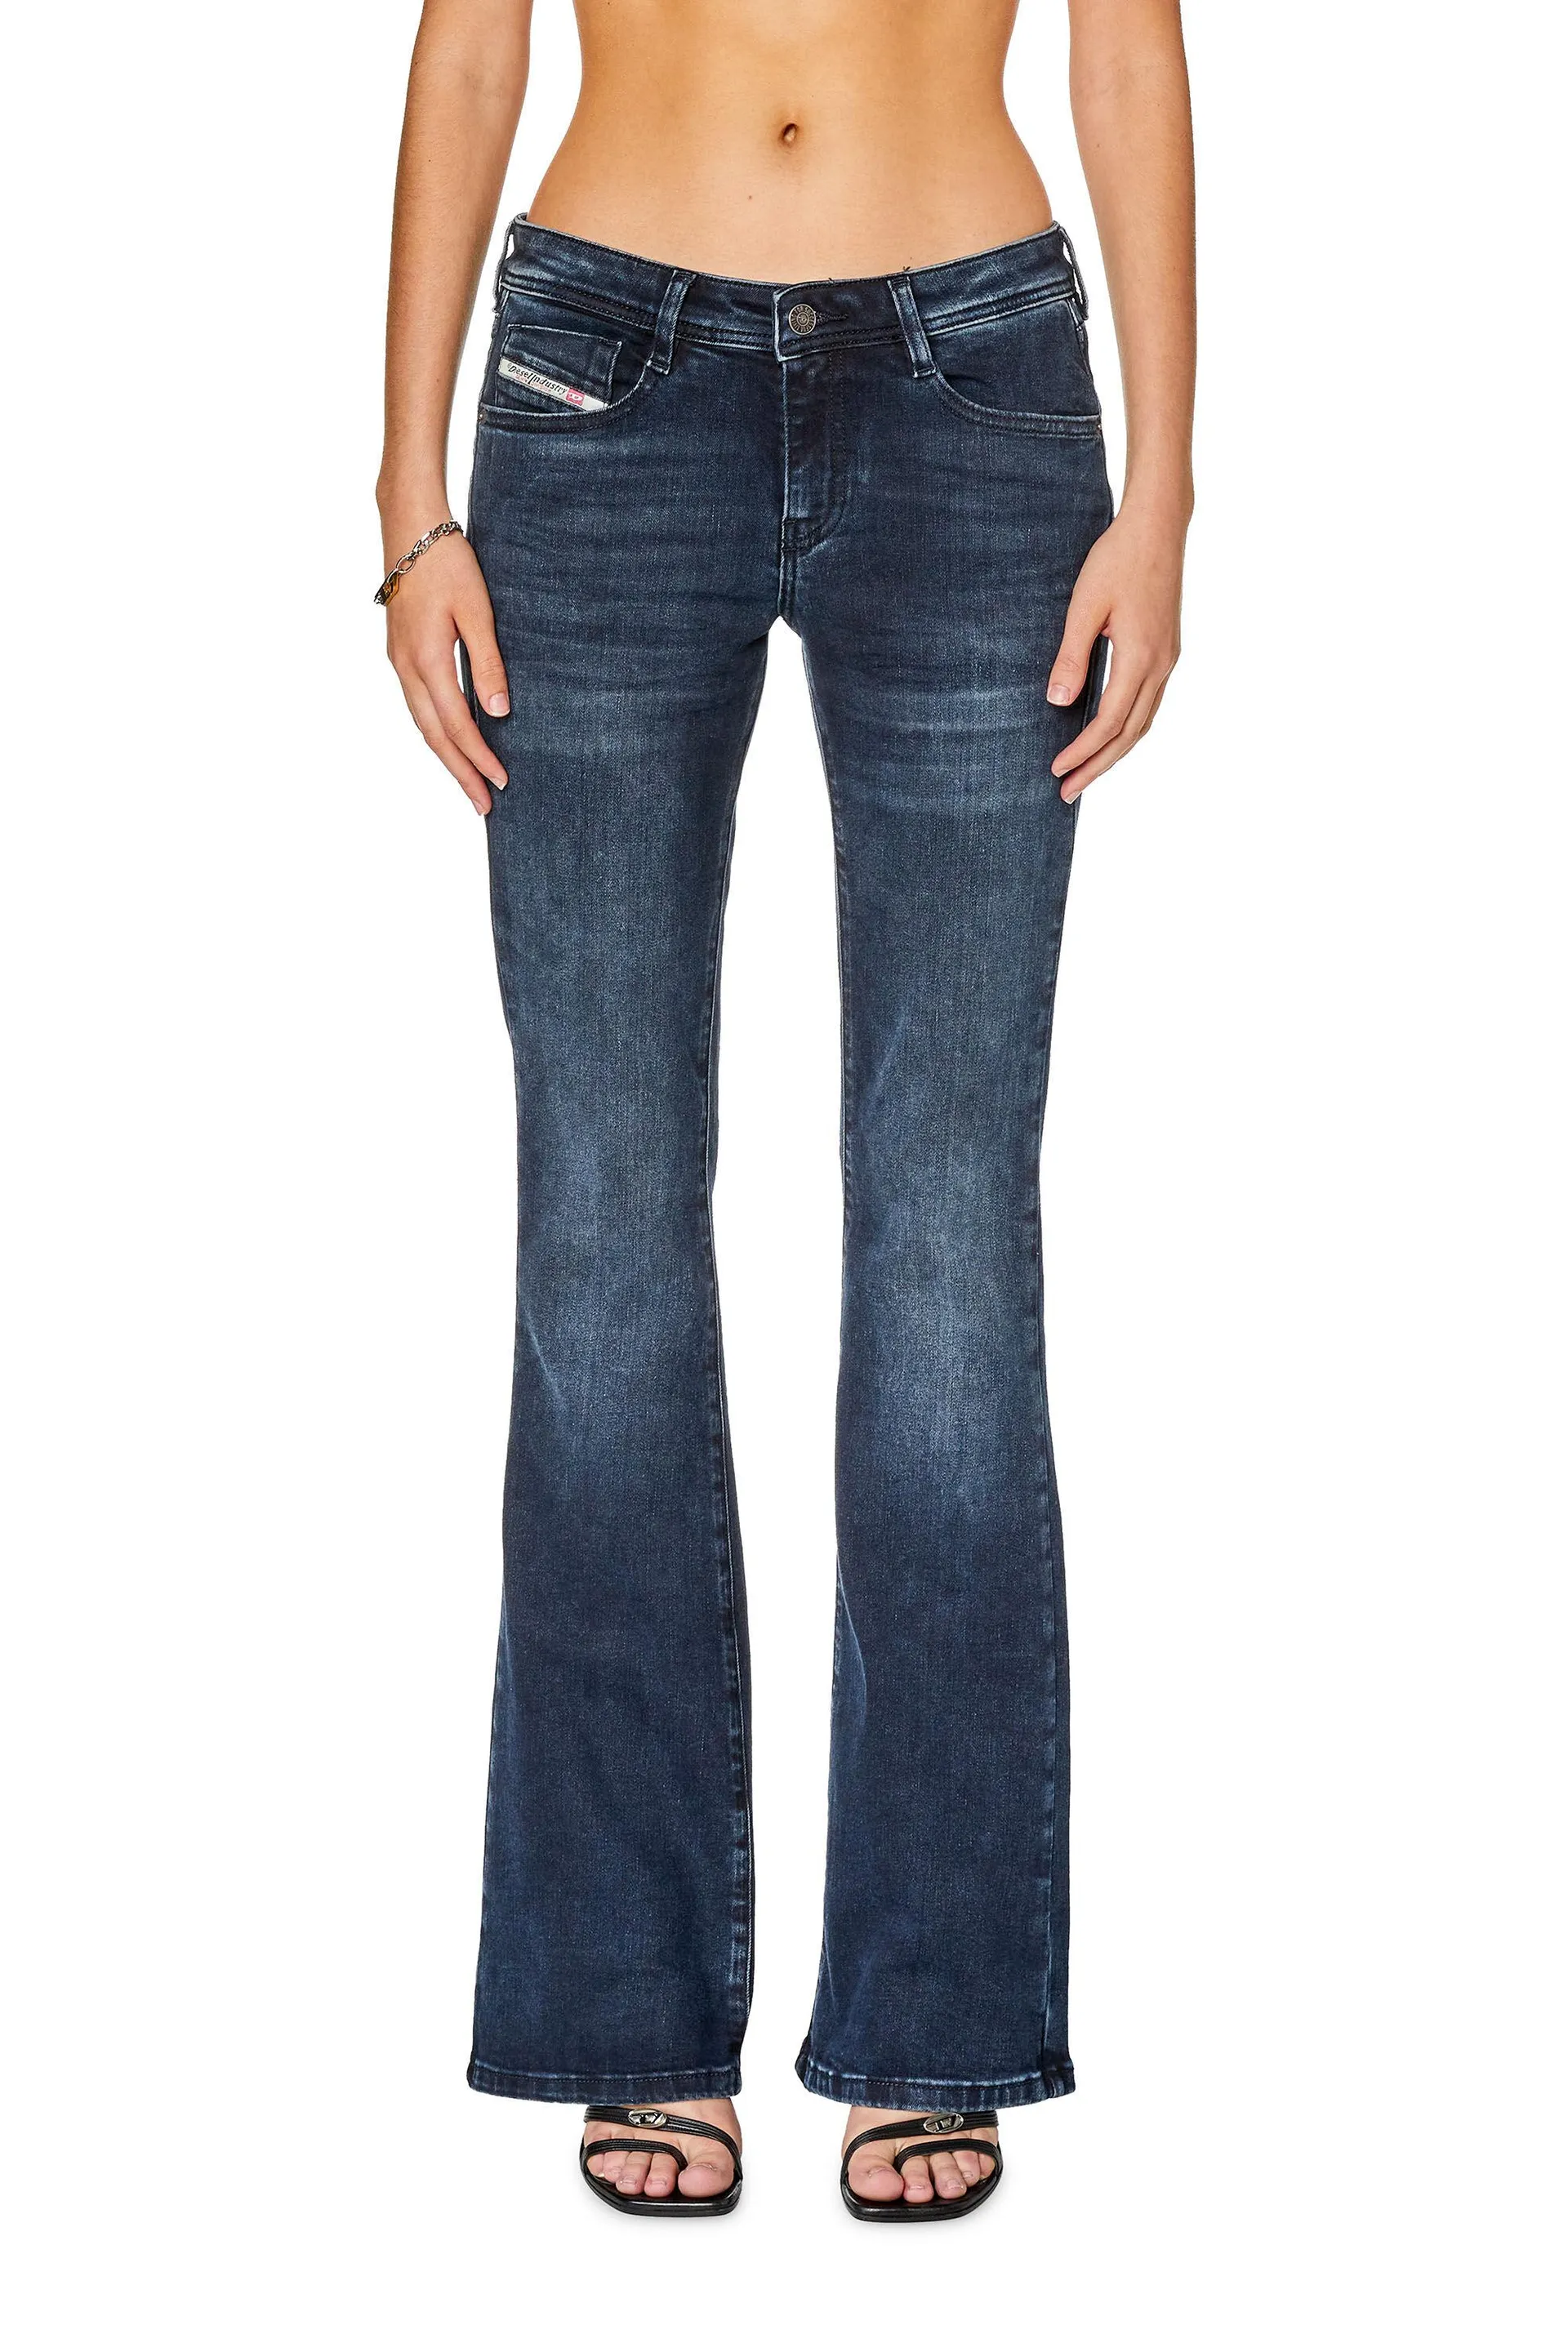 bootcut and flare jeans 1969 d-ebbey 0enar